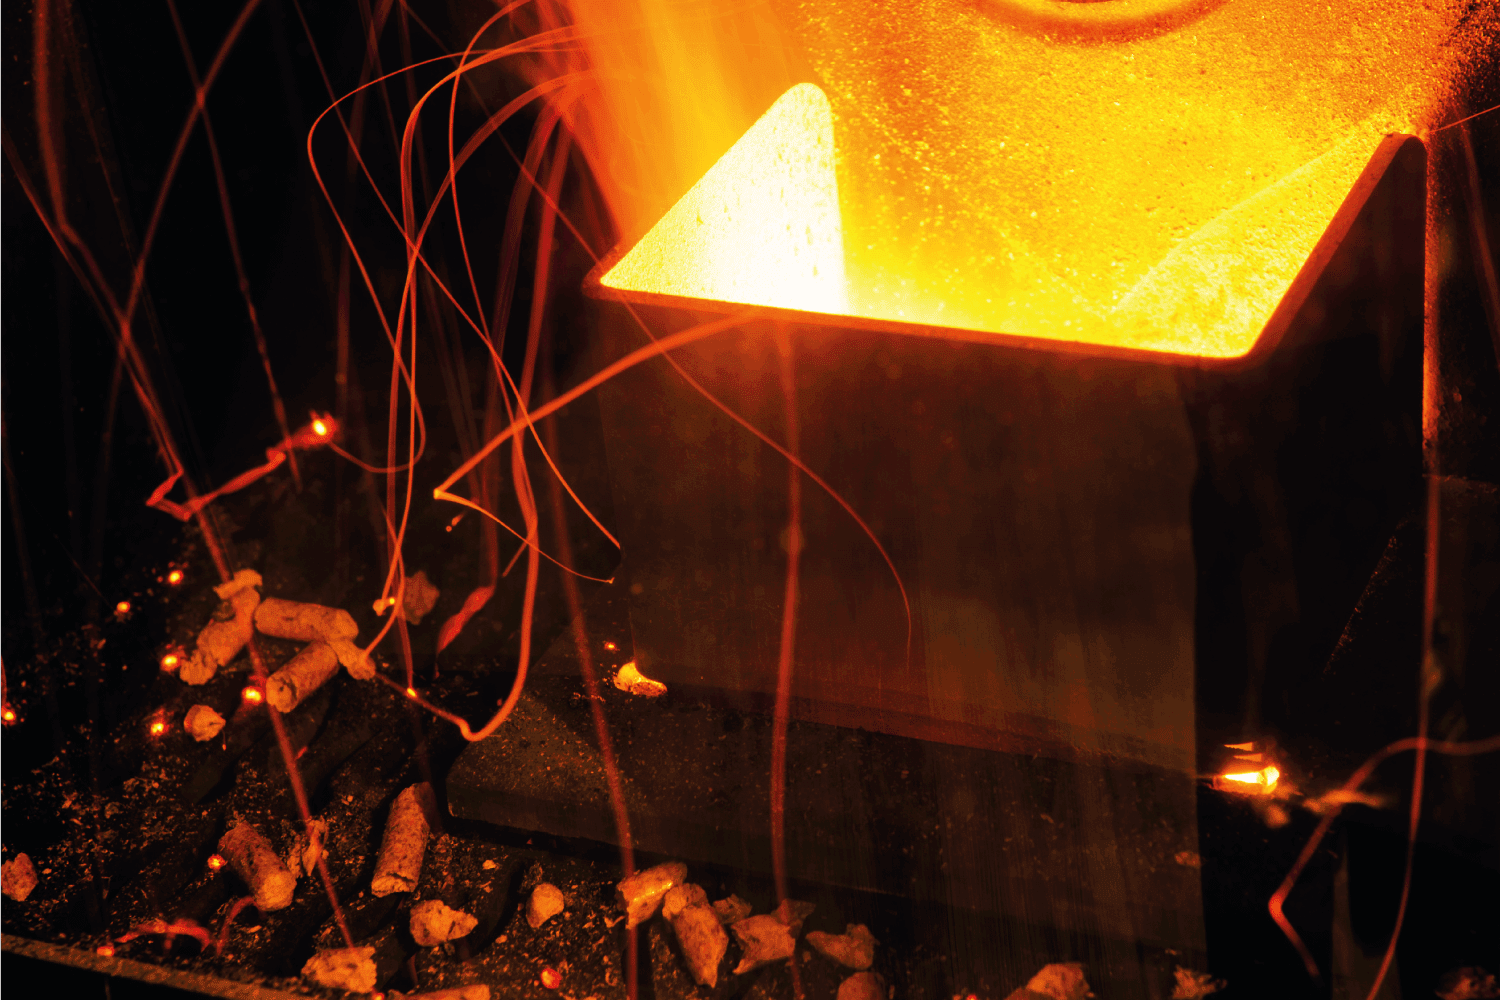 Closeup on the combustion of an pellet stove